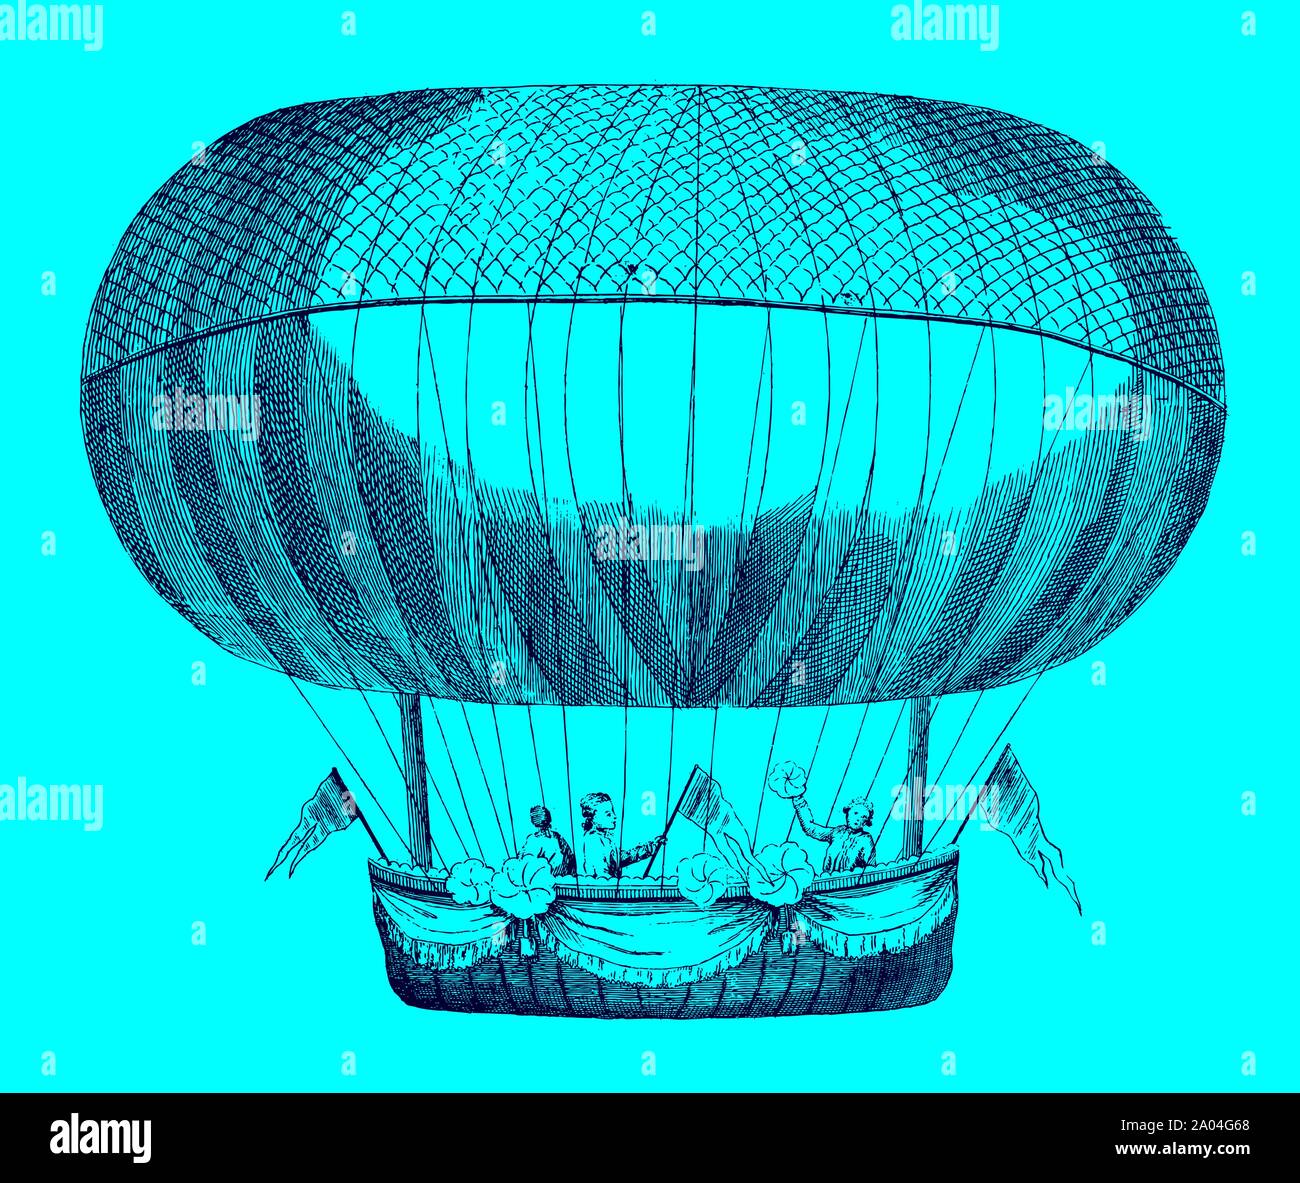 Three passengers standing in the gondola of a historic balloon in front of a blue background. Illustration after an etching from the 18th century. Edi Stock Vector